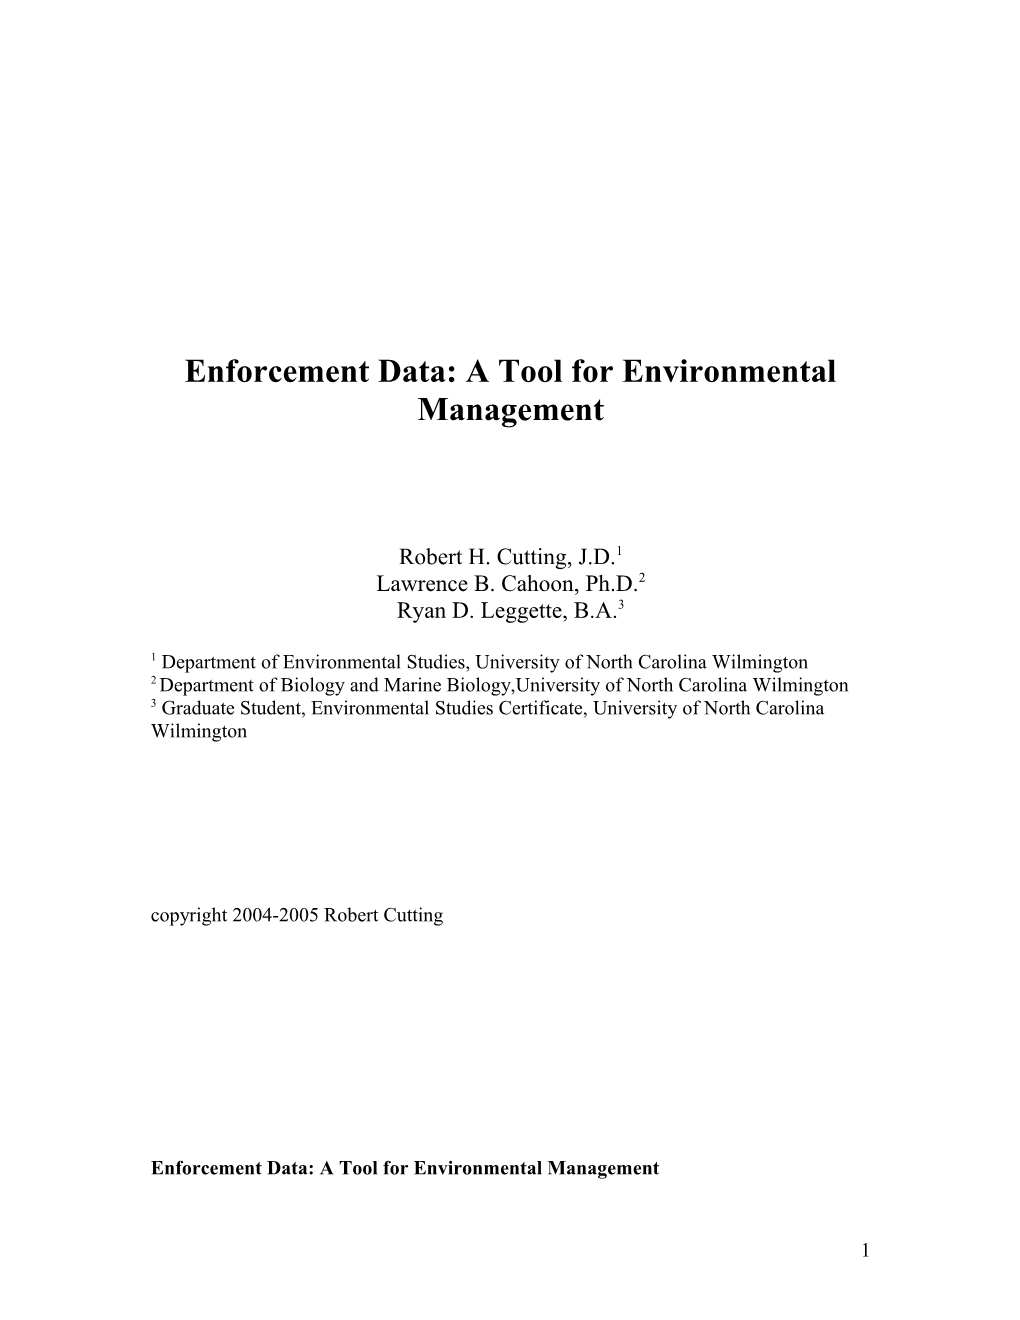 Enforcement Data: a Tool for Pollution Control